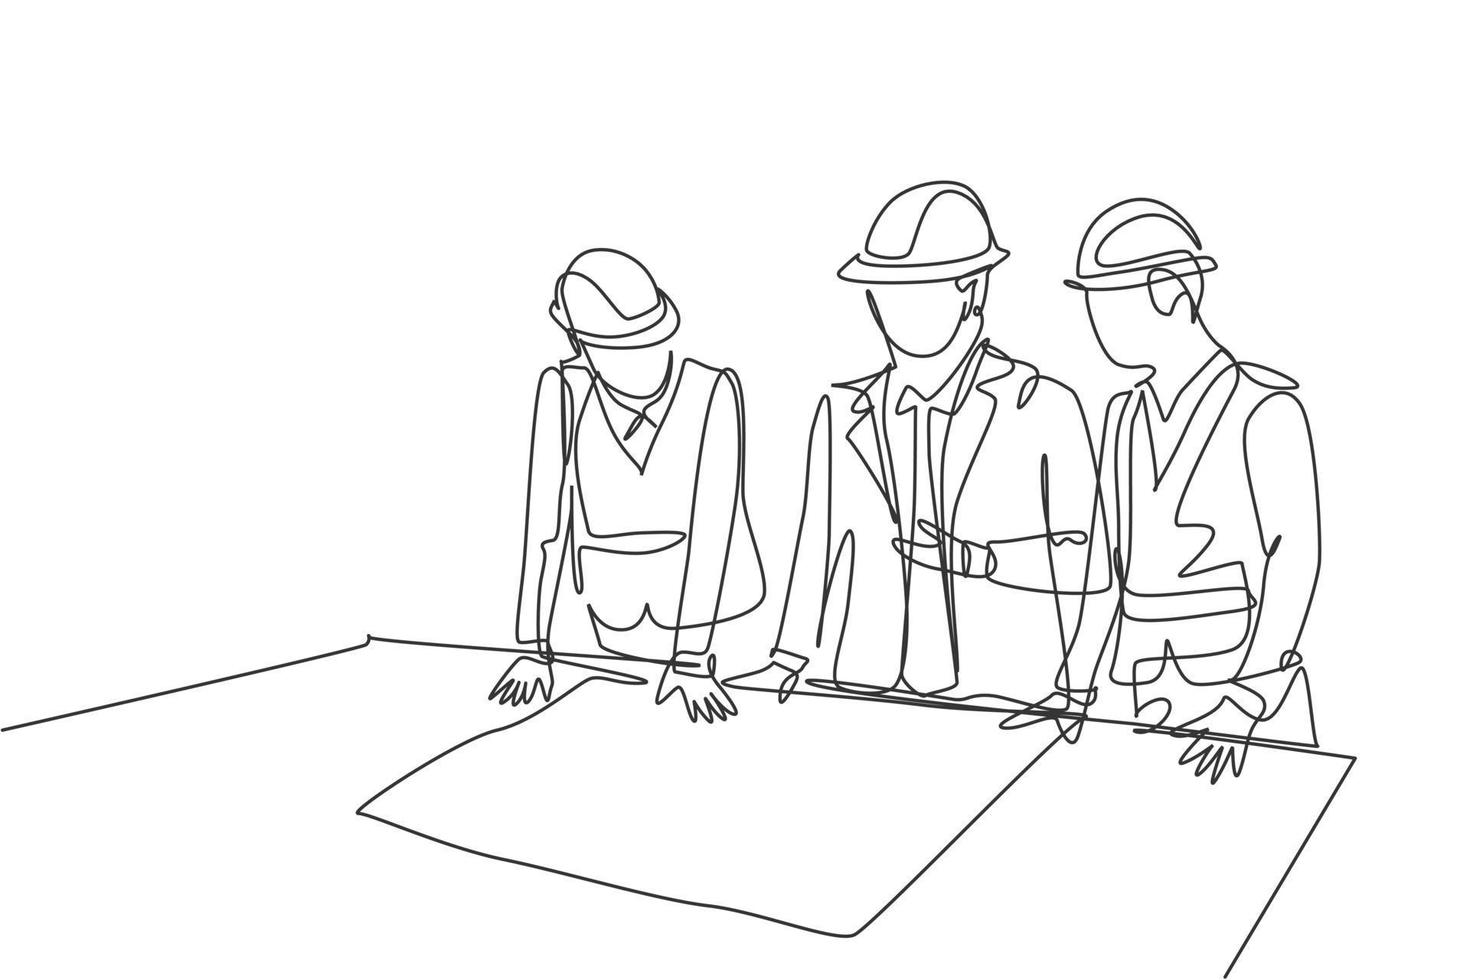 One continuous line drawing team of young architects presenting construction sketch draft blueprint design to manager. Building architecture business concept. Single line draw design illustration vector